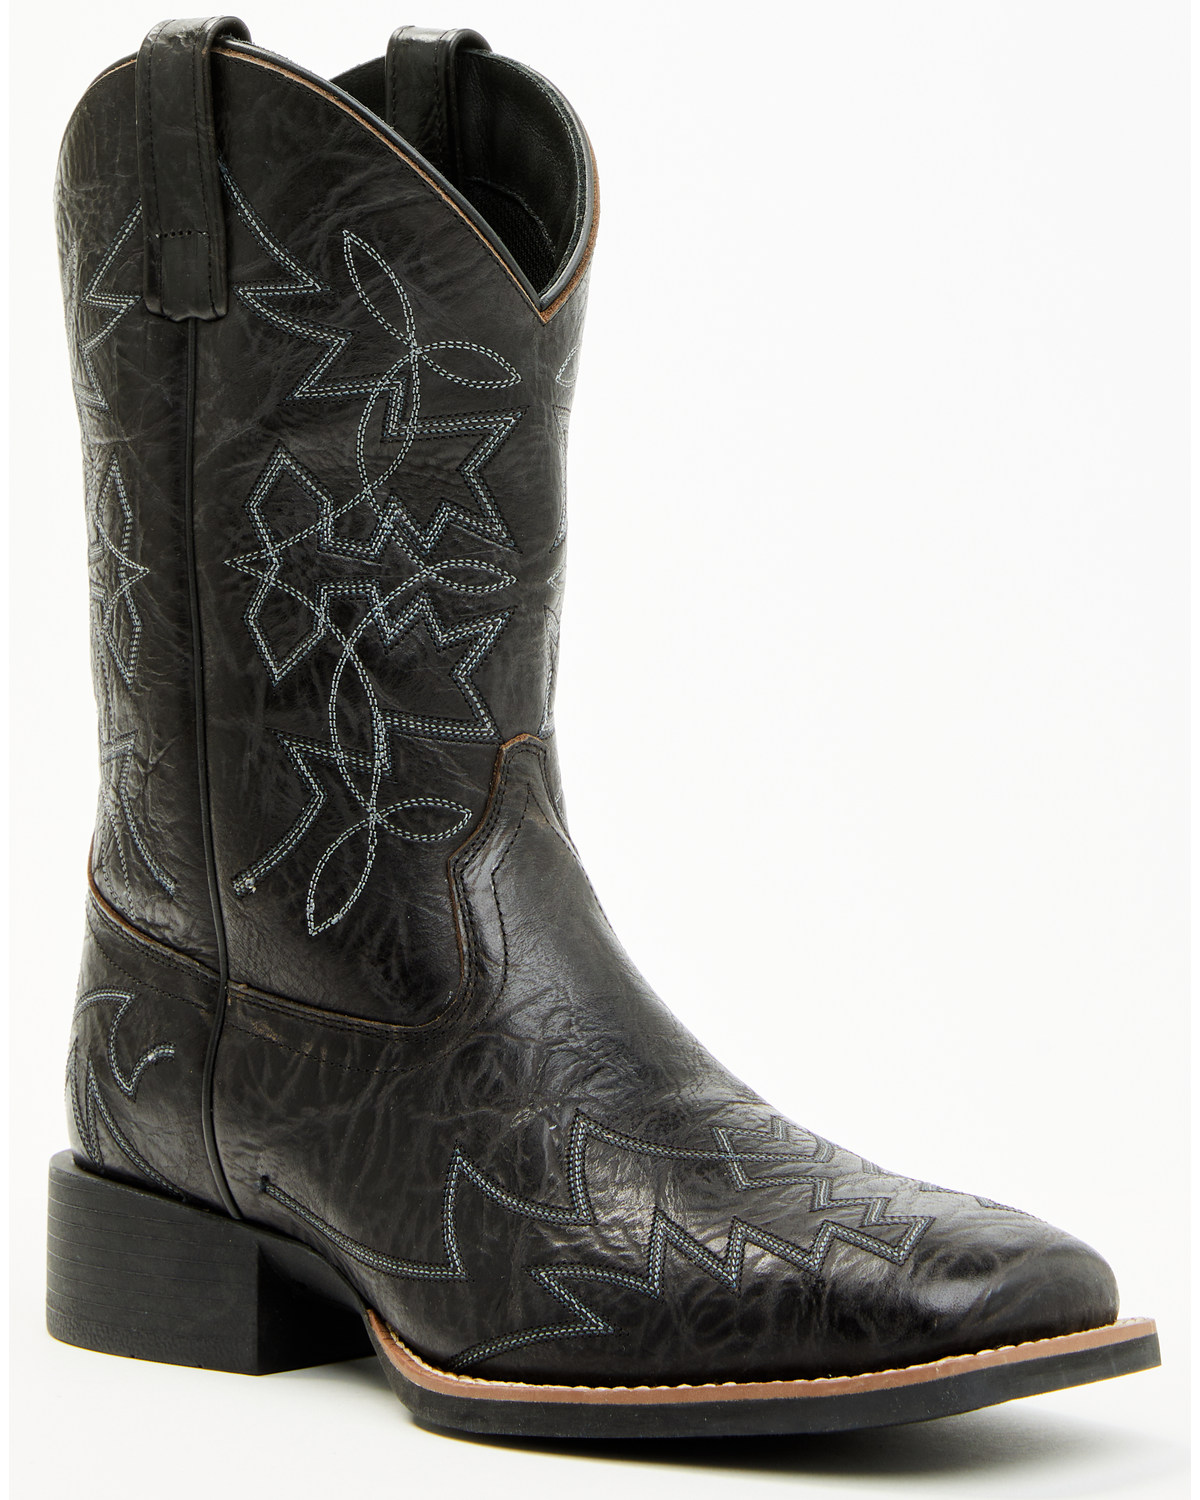 Cody James Men's Ace Performance Western Boots